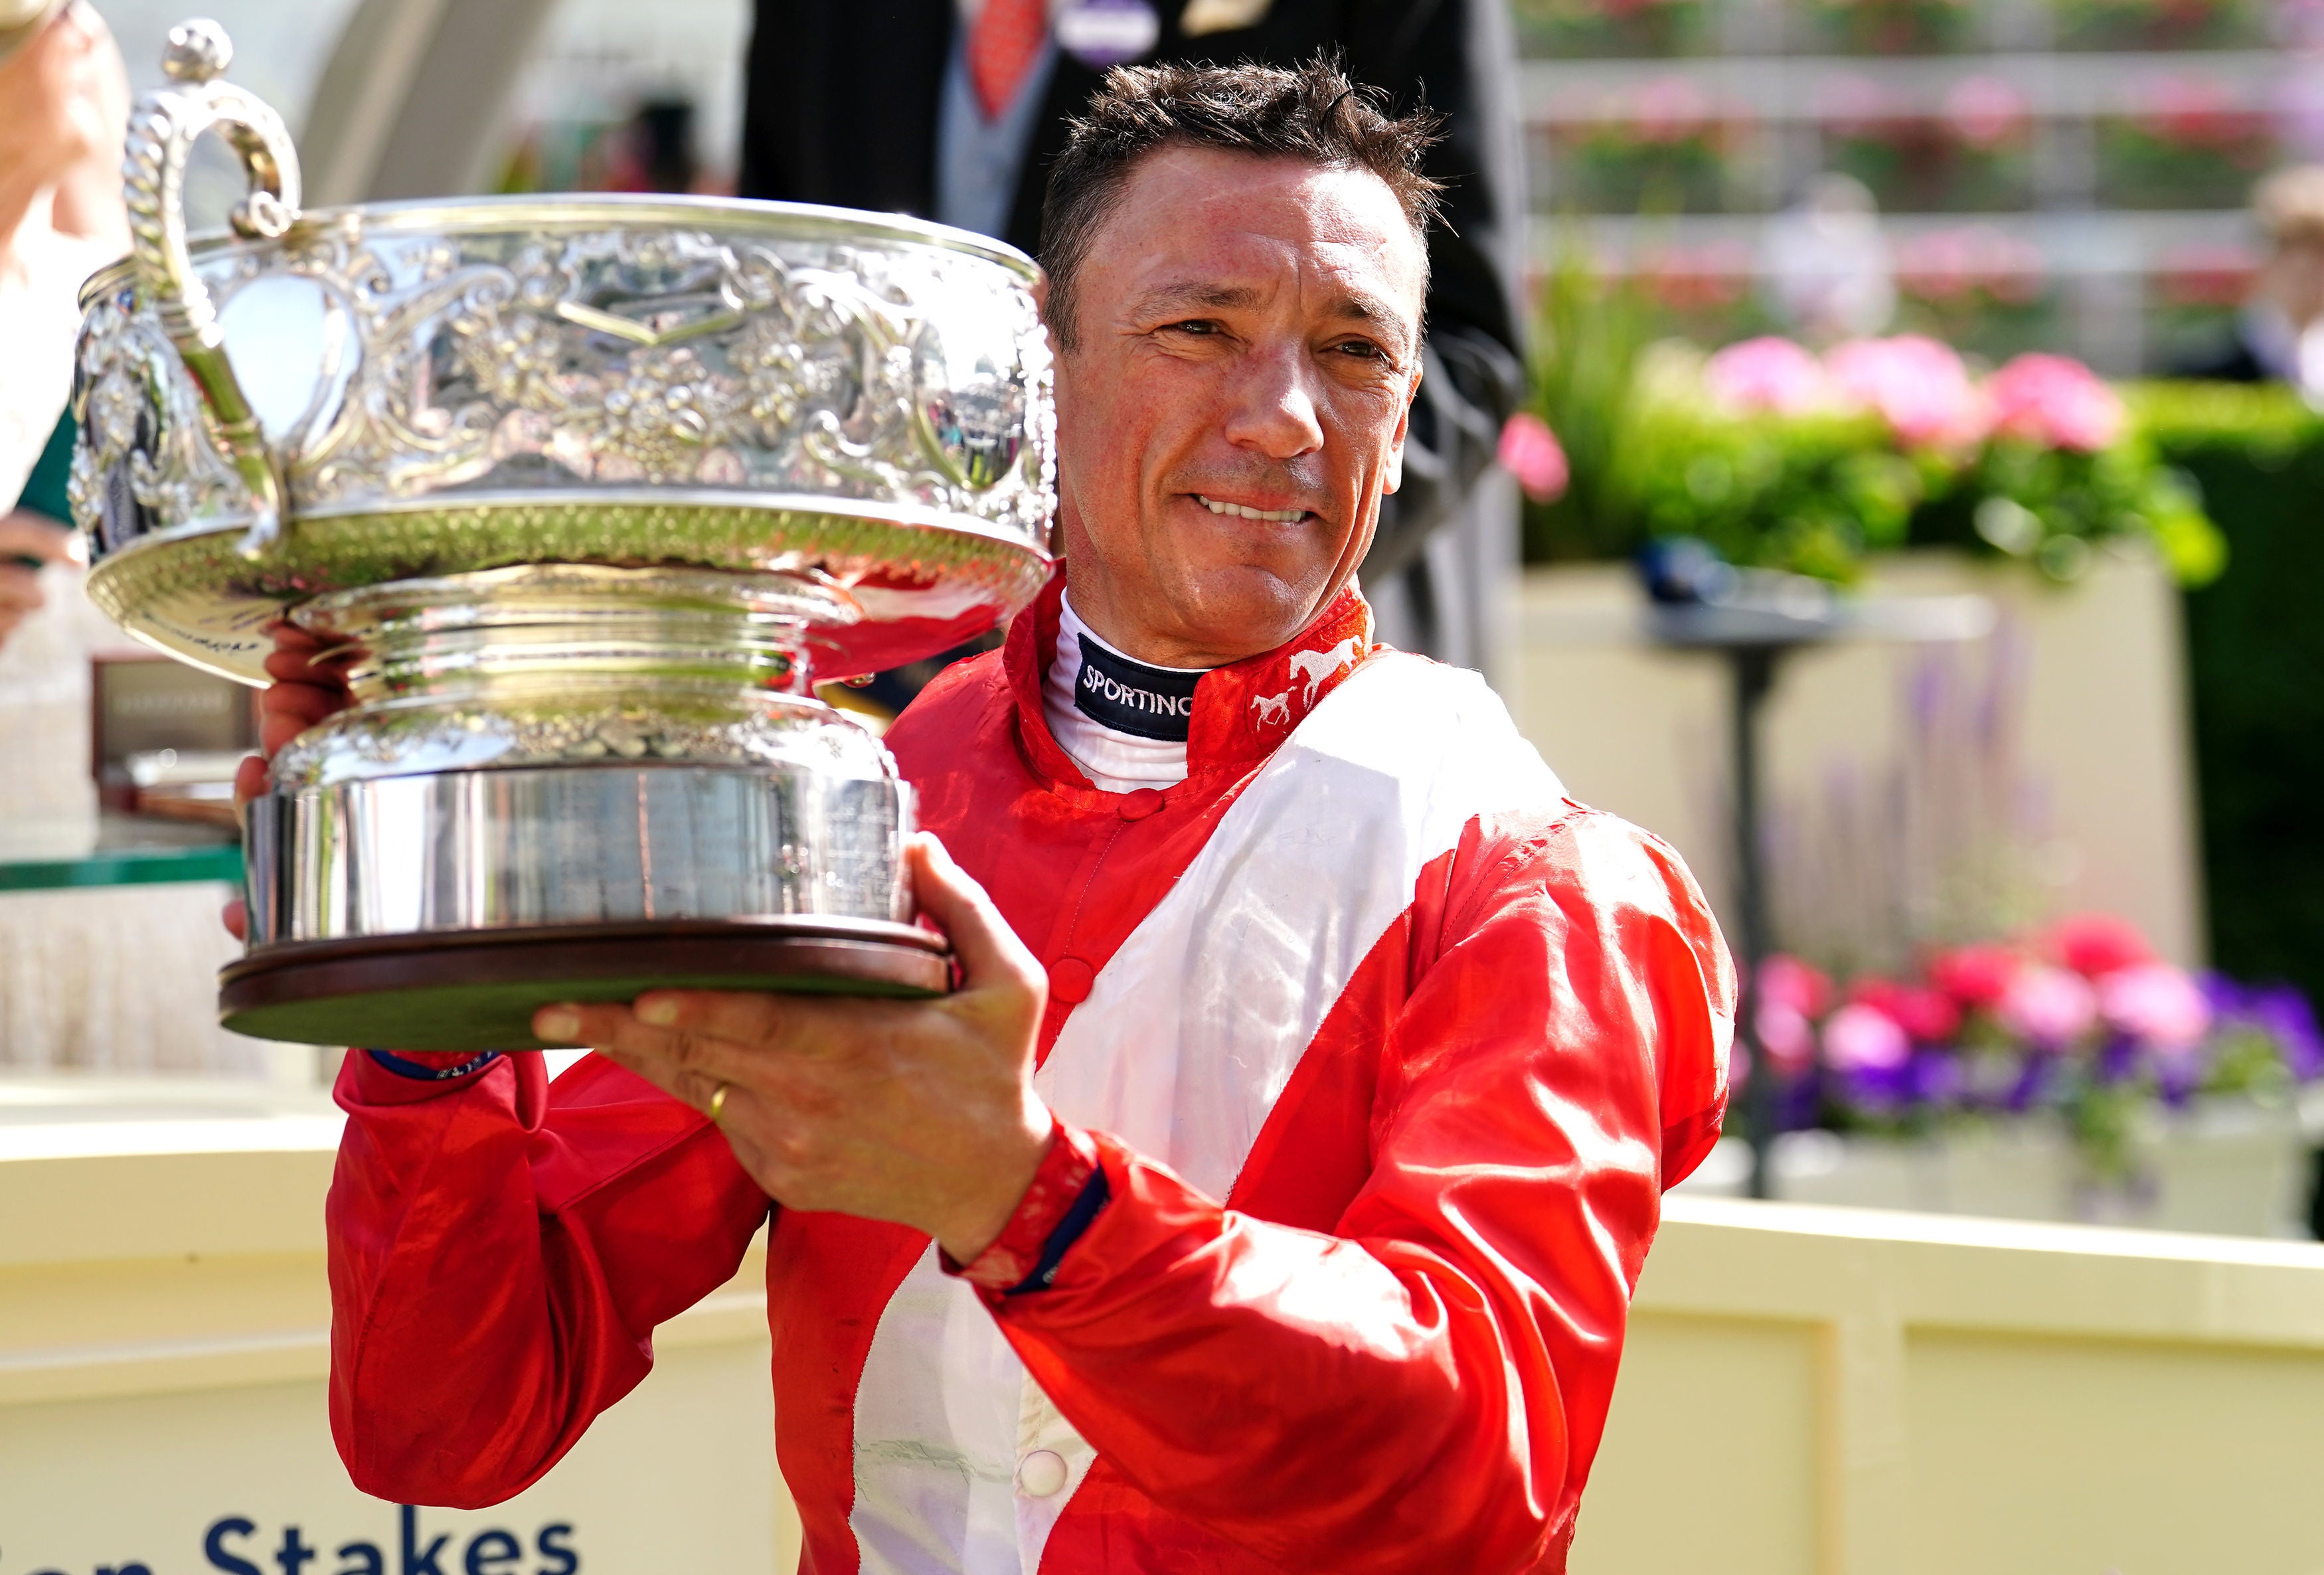 Jockey Frankie Dettori celebrates with the trophy after winning the Coronation Stakes with horse Inspiral during day four of Royal Ascot